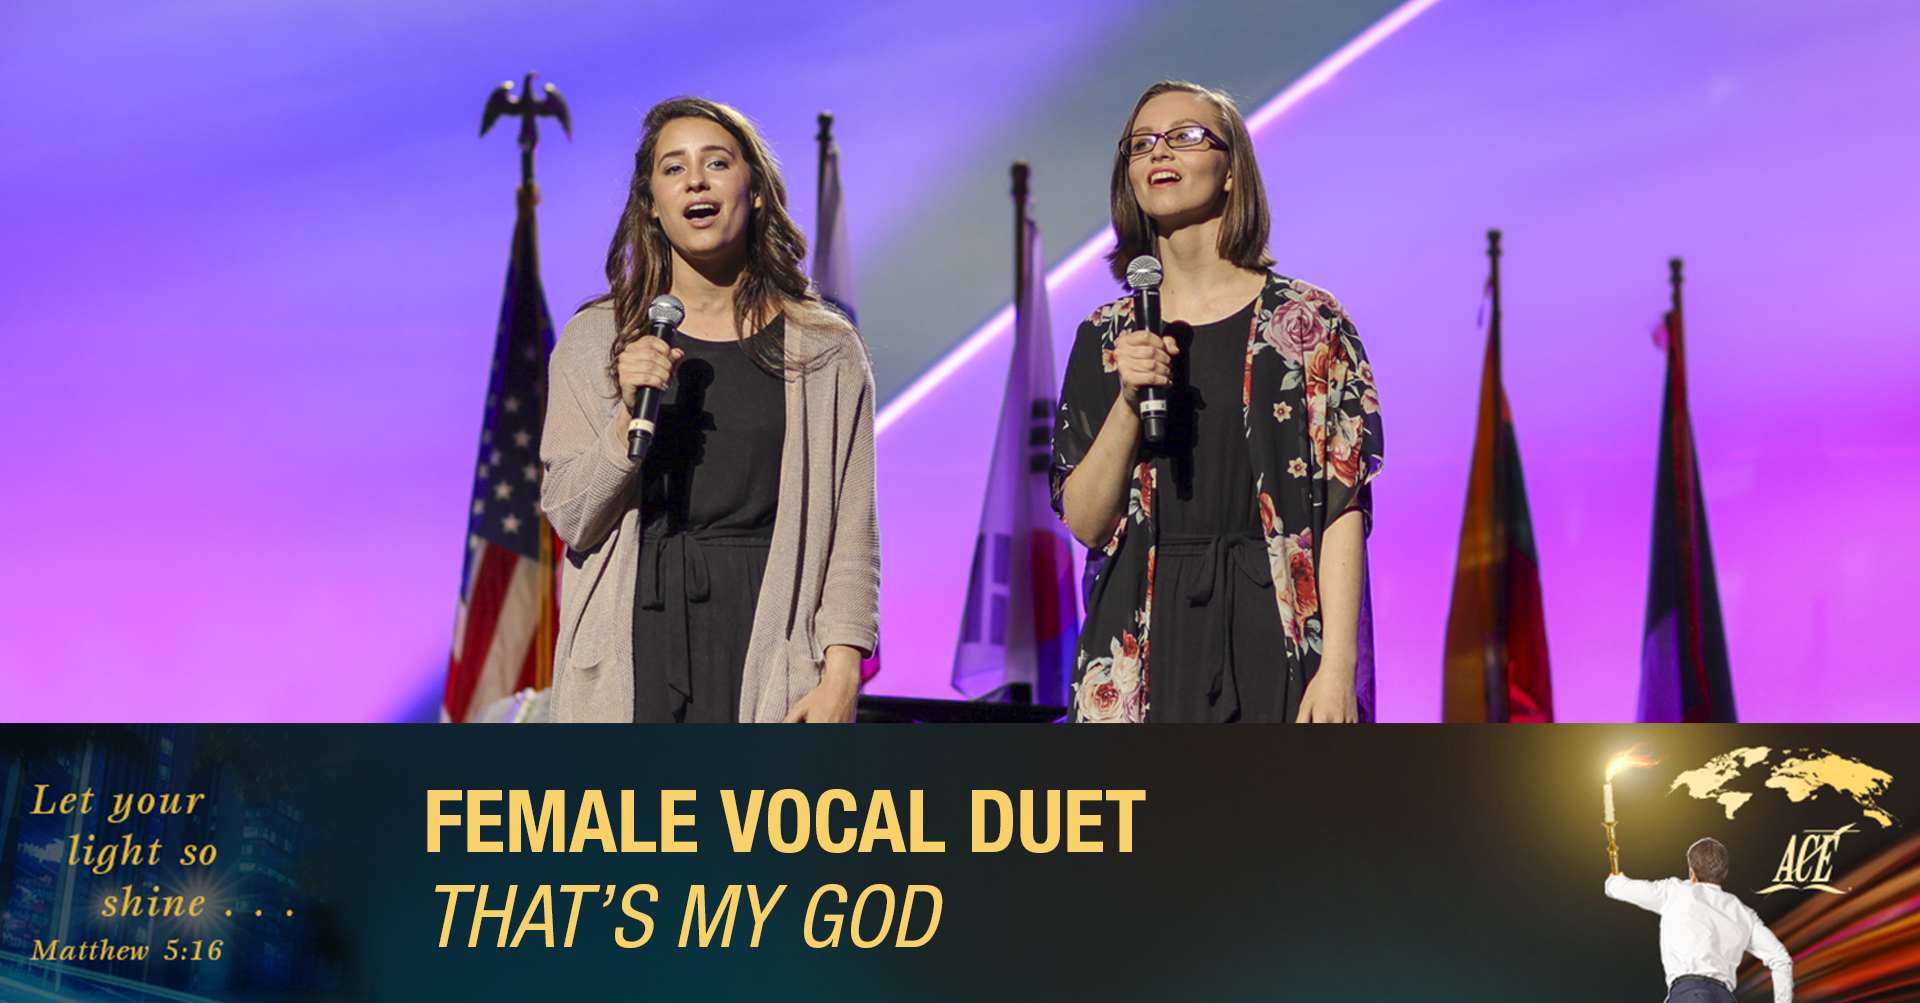 Female Vocal Duet, "That's My God" - ISC 2019